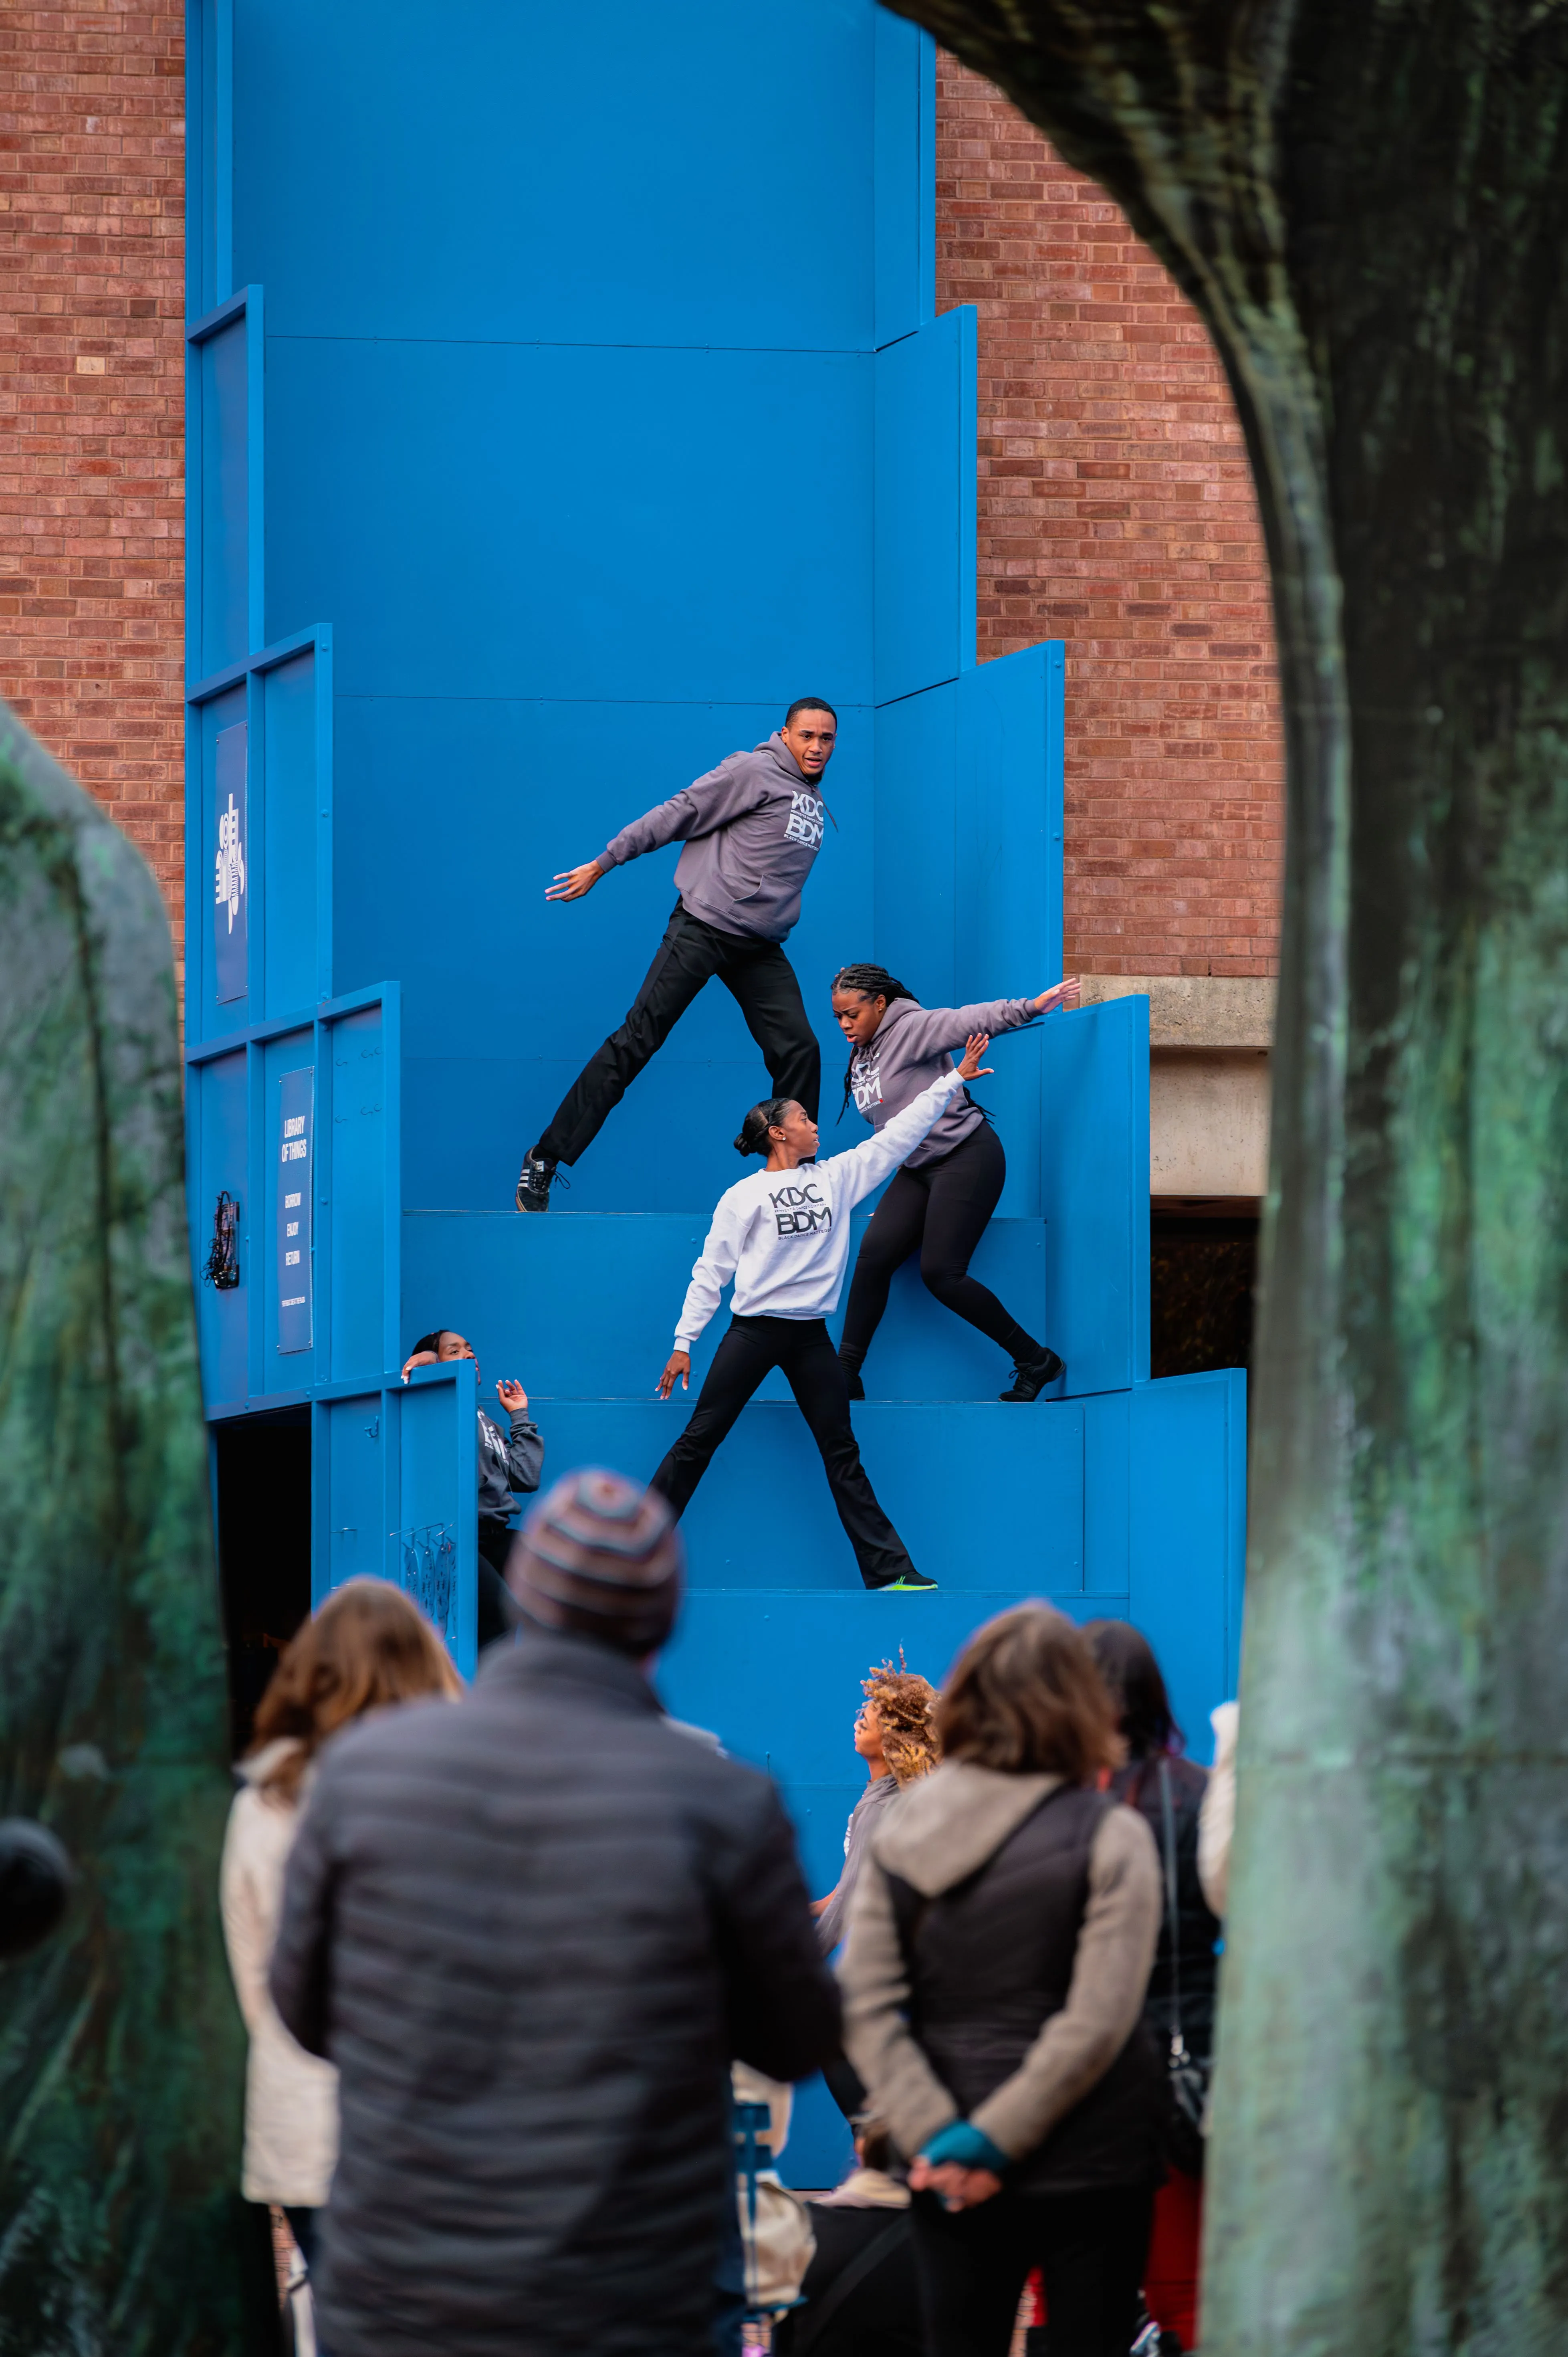 Spectators watching an illusion of two people climbing and defying gravity on a vertical, blue painted street wall.